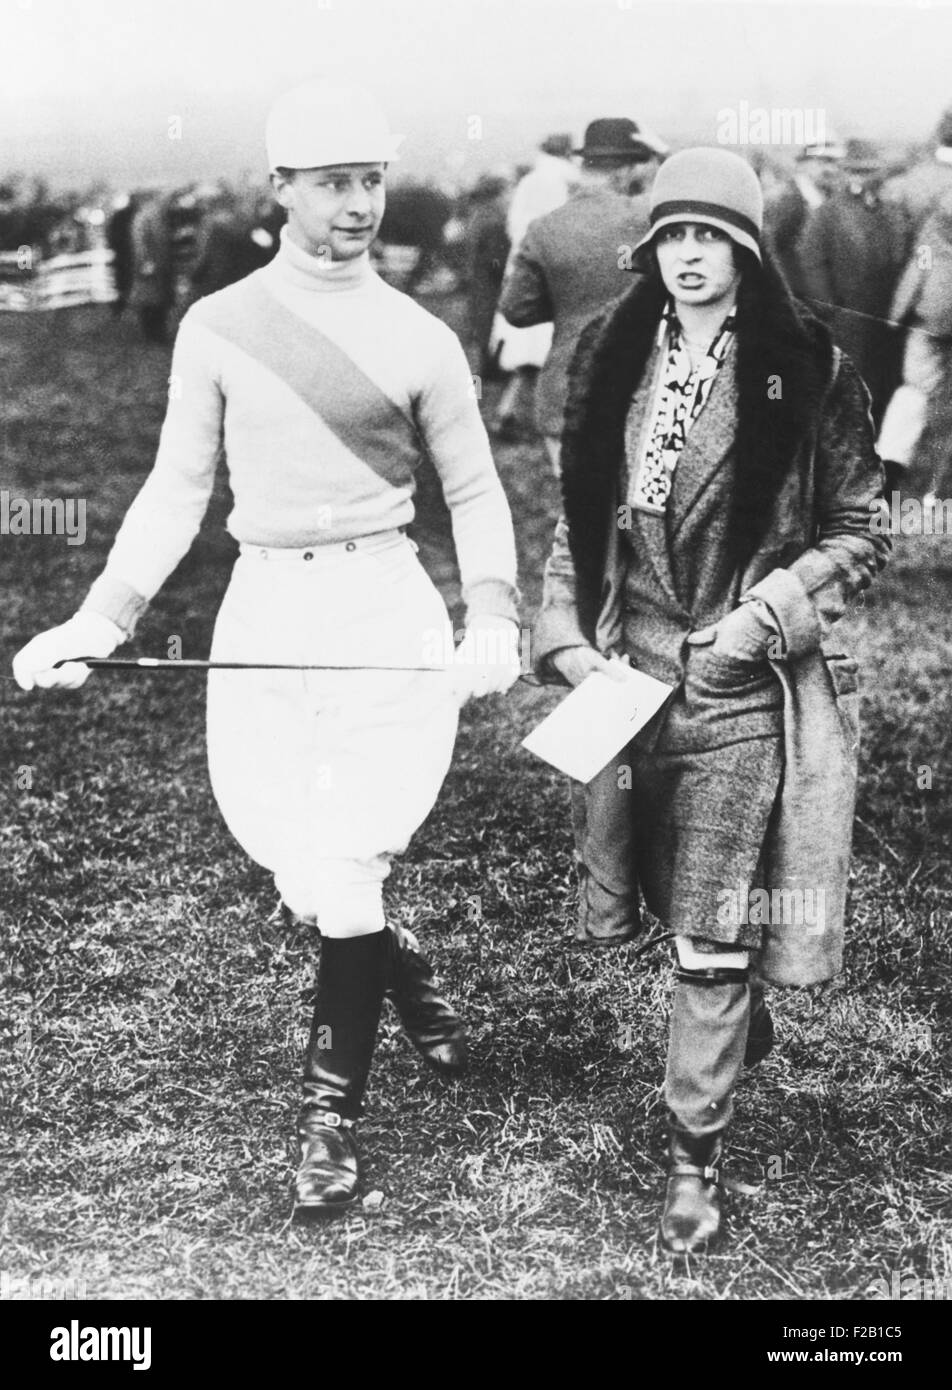 Waldorf Astor and his sister Phyllis Astor, at the Oxford University. They were at the Point to Point Steeplechase Races at Somerton, England, March 1928. (CSU 2015 7 428) Stock Photo